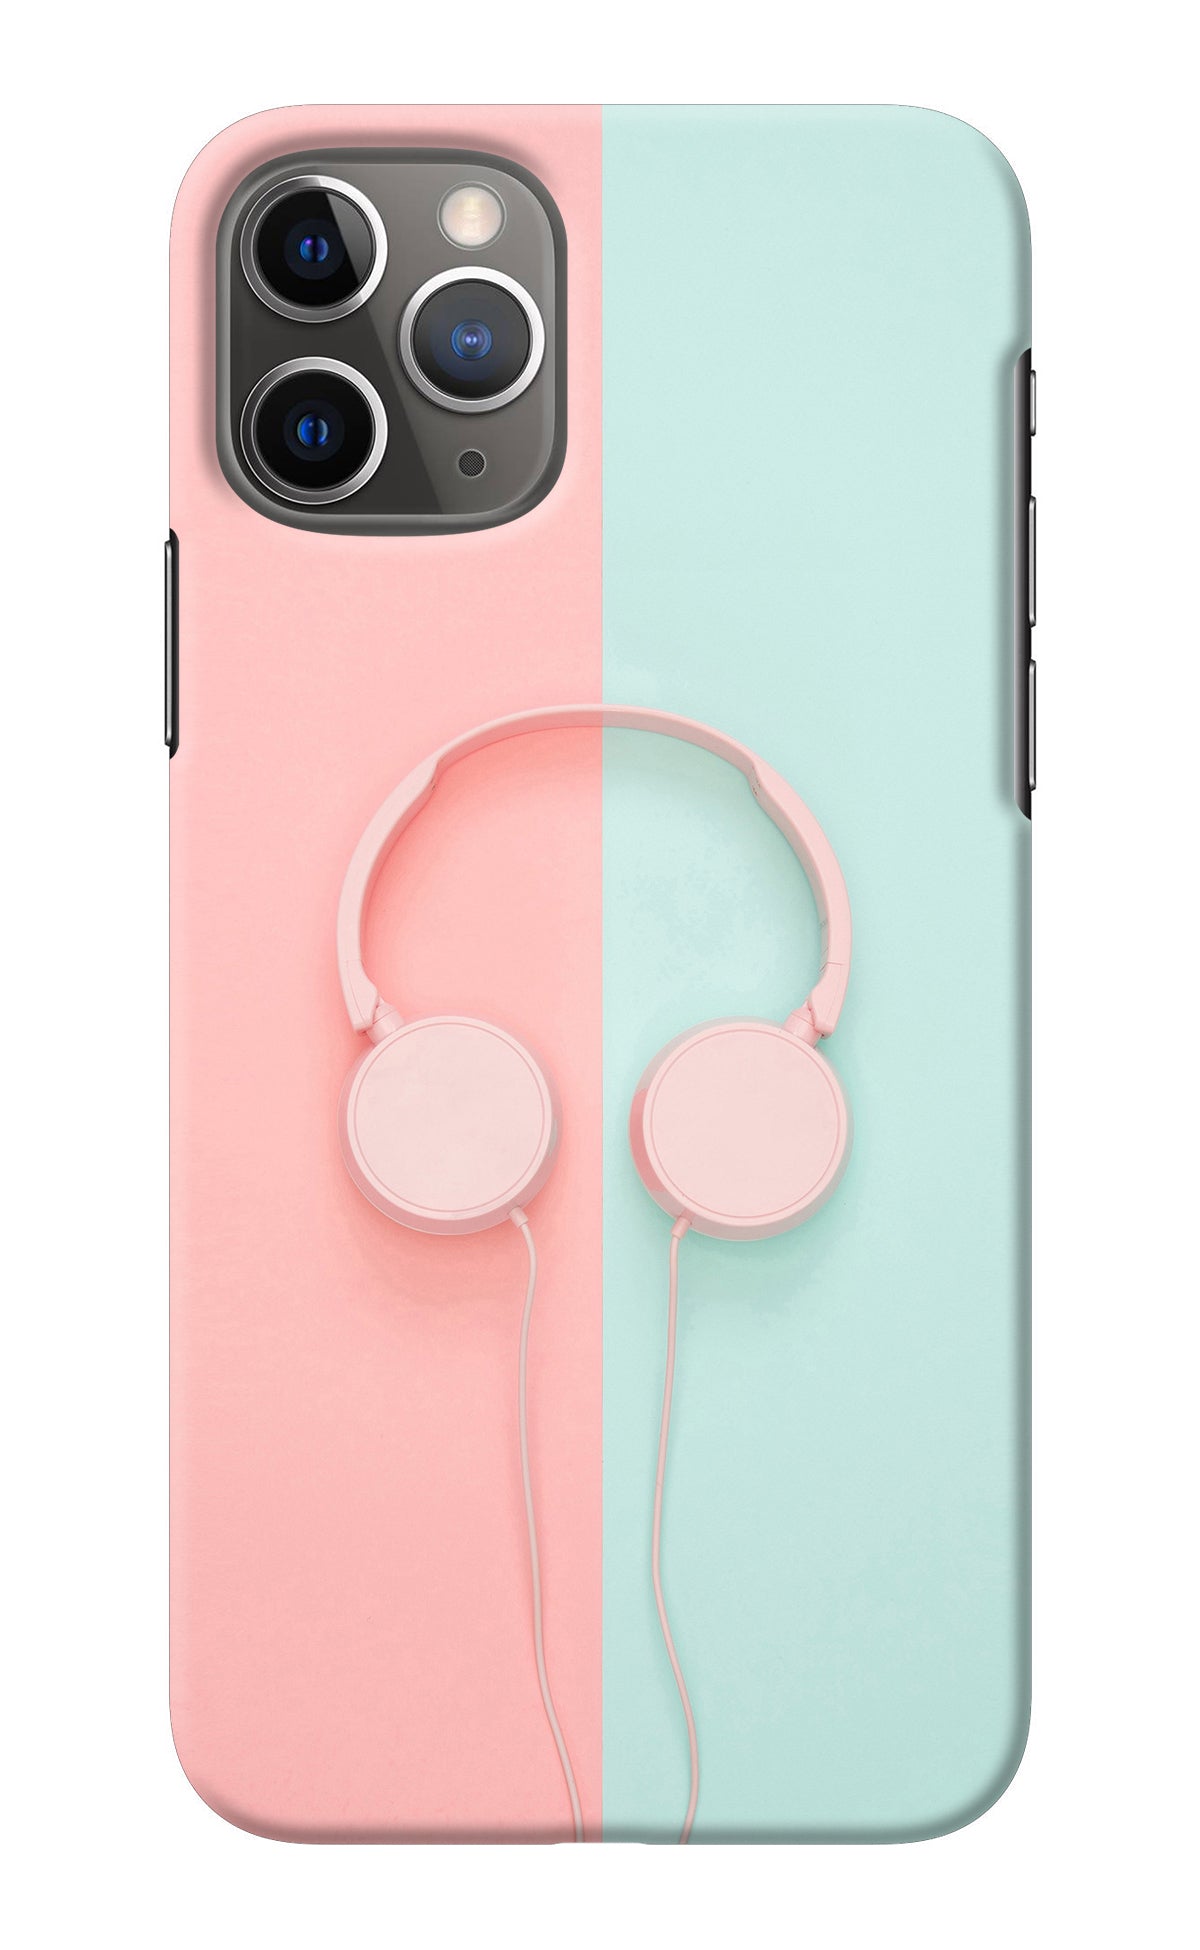 Music Lover iPhone 11 Pro Max Back Cover